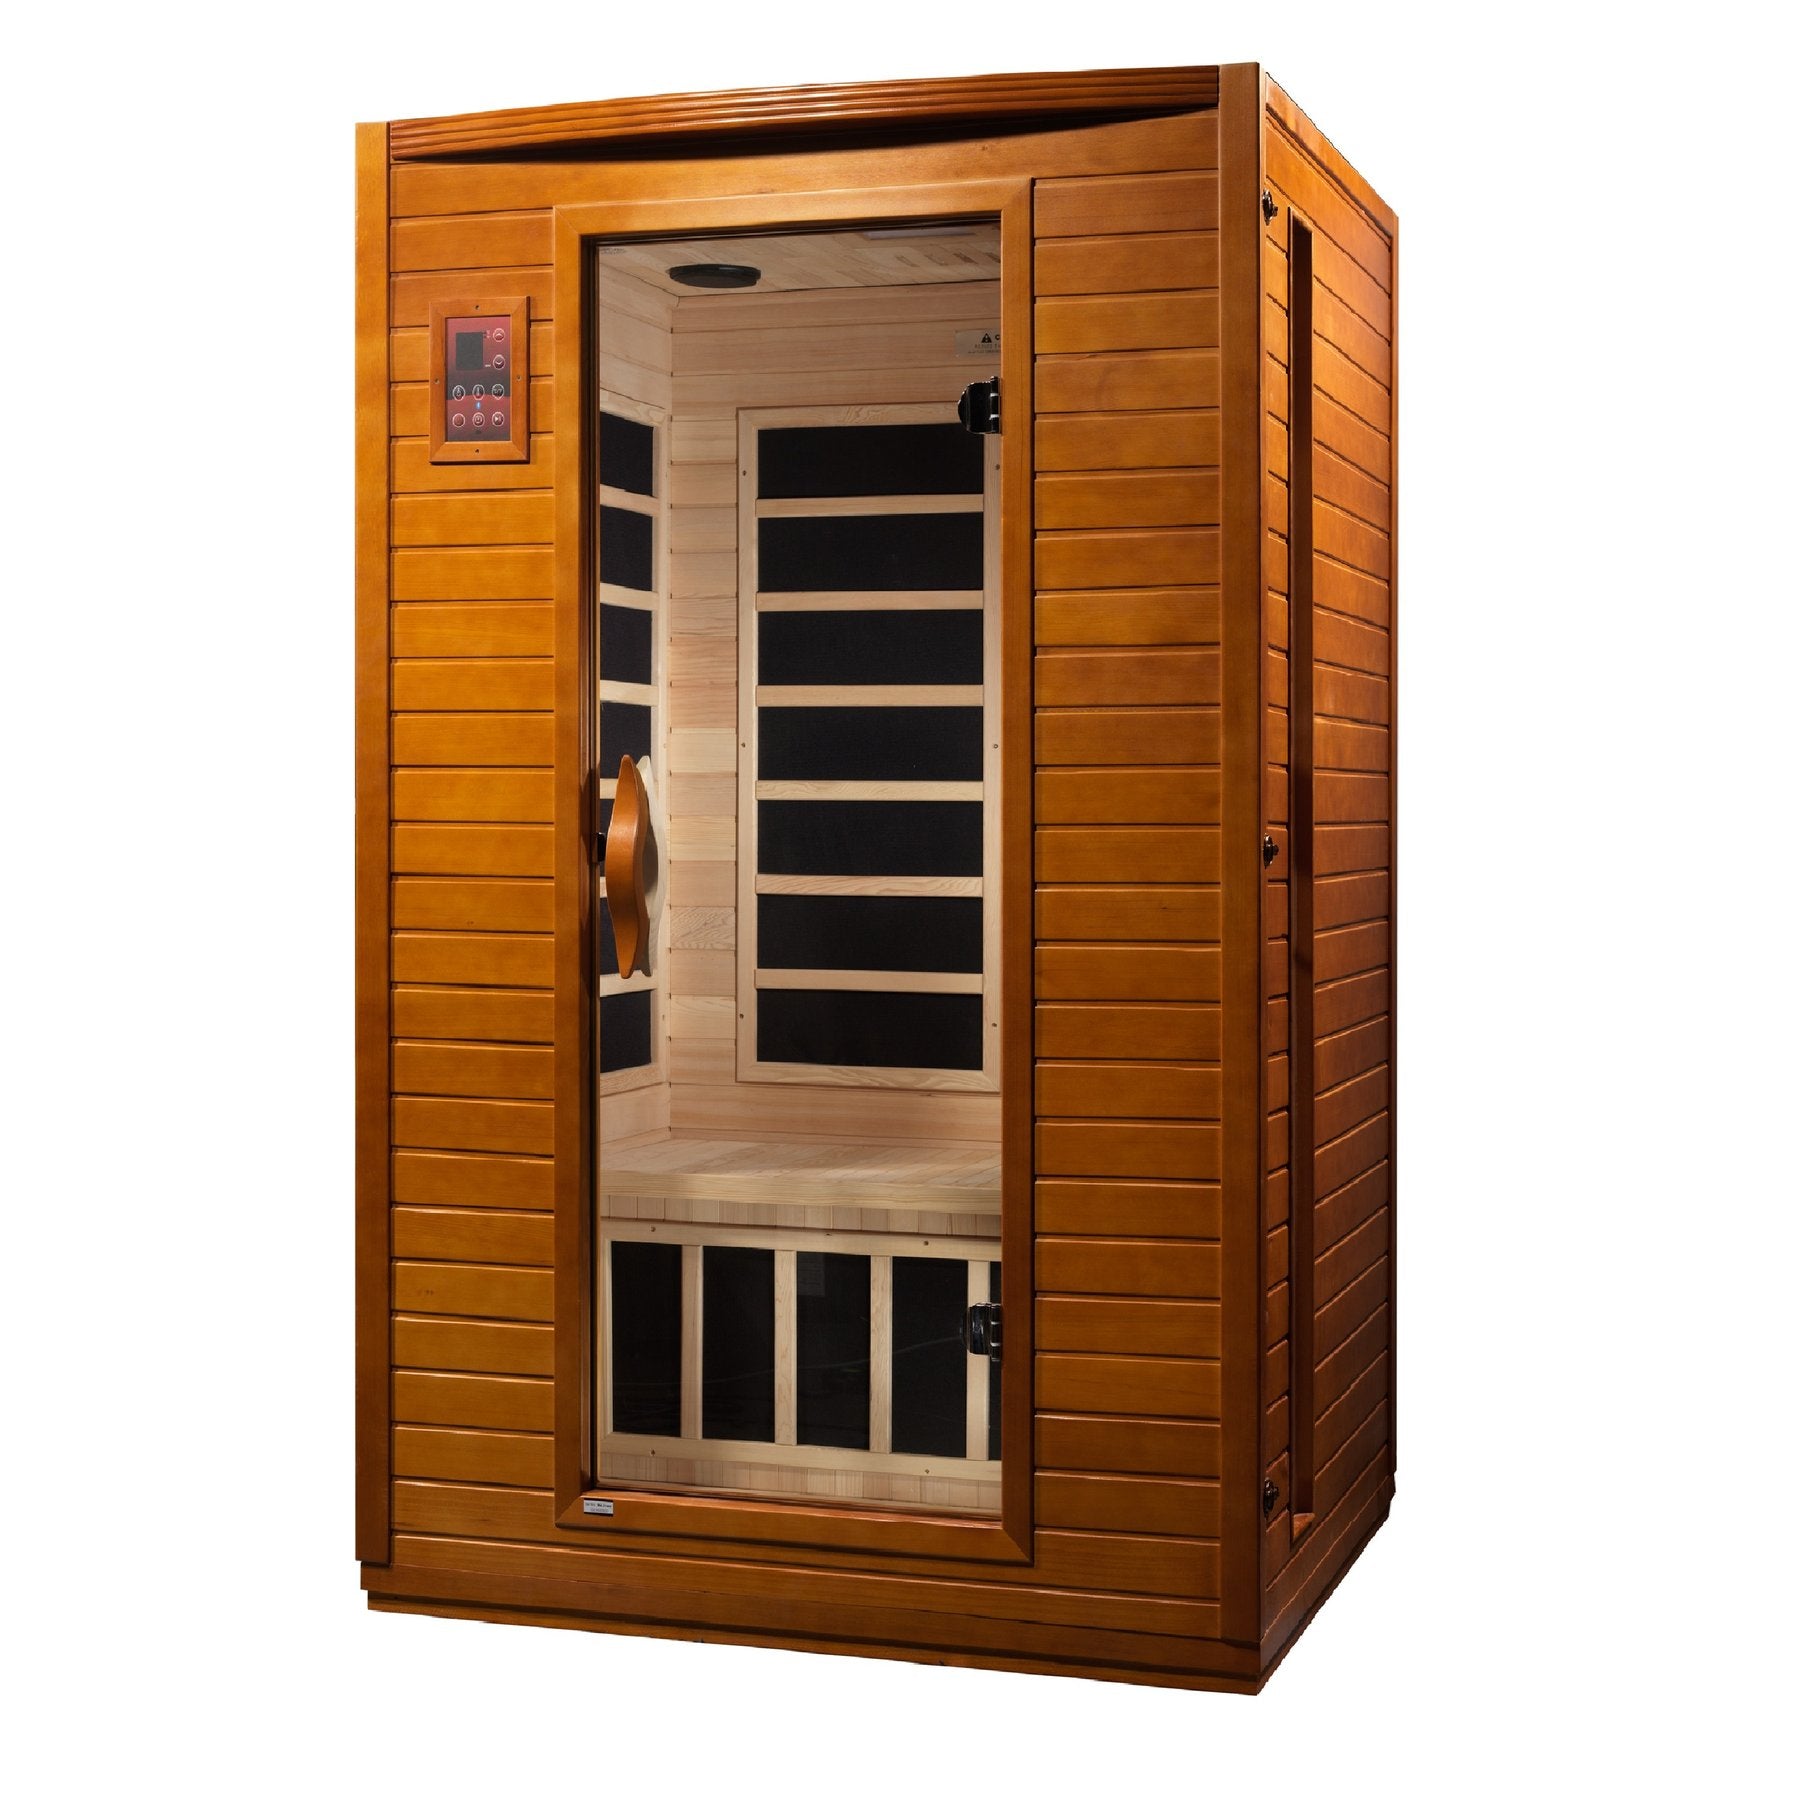 Versailles Edition 2 Person Dynamic Indoor Low EMF Far Infrared Sauna / promo code "Calmspas30" for $30 DISCOUNT / Ships in 2 days